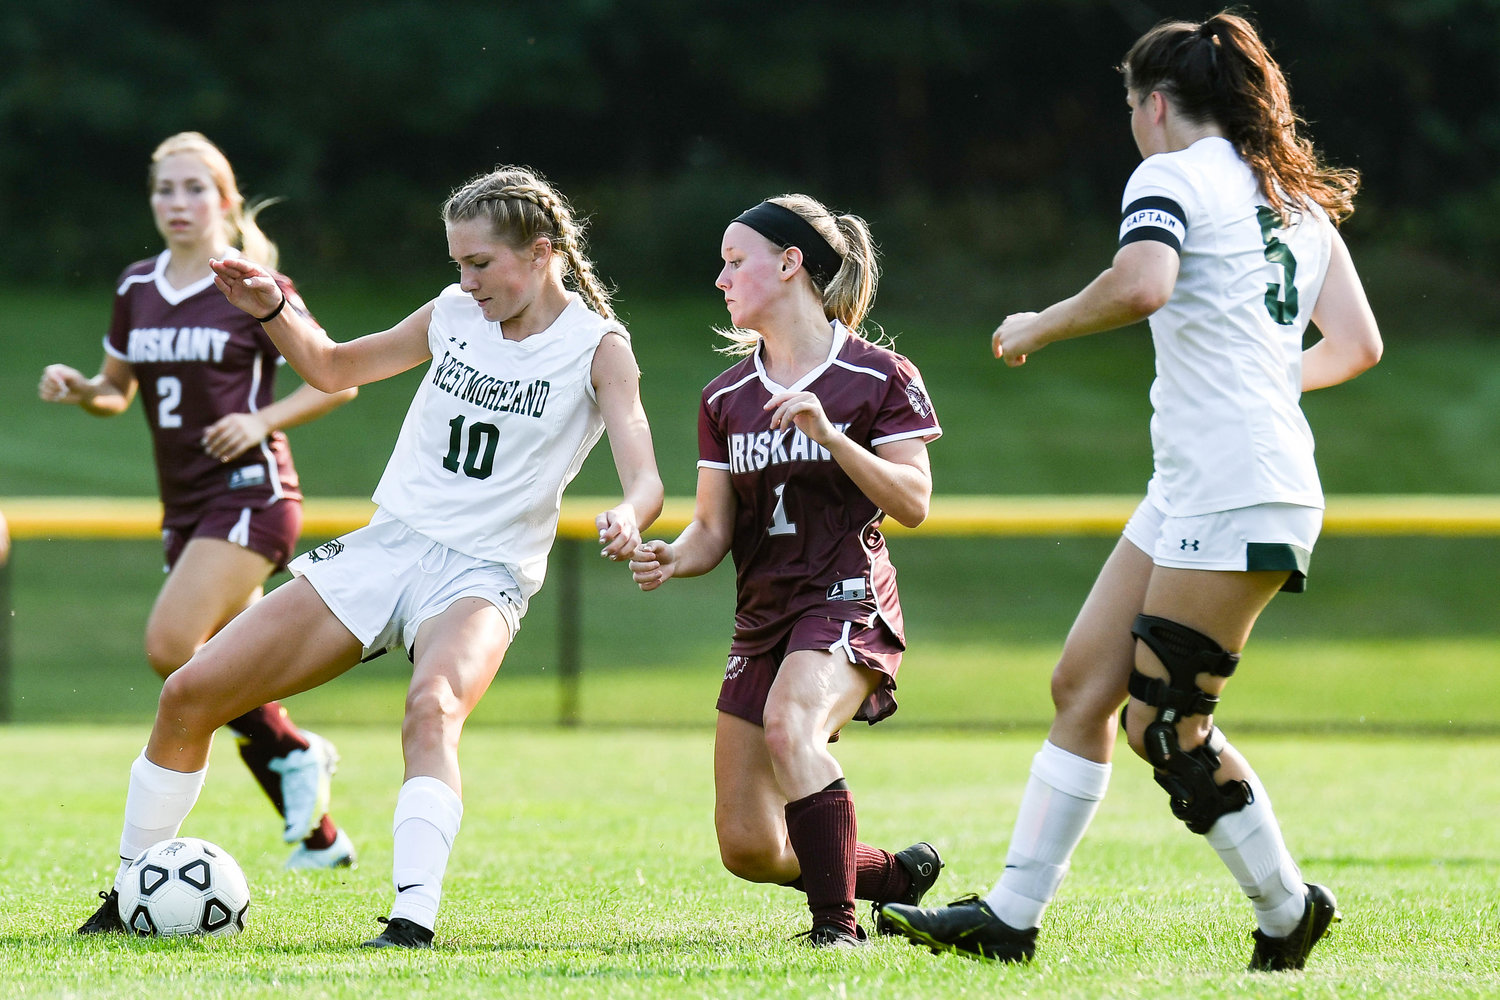 Westmoreland's Victoria Downs controls the ball against Oriskany's Addison Fabbio (1) during the game on Friday at Bernie Block Field in Oriskany. Westmoreland won 3-0.